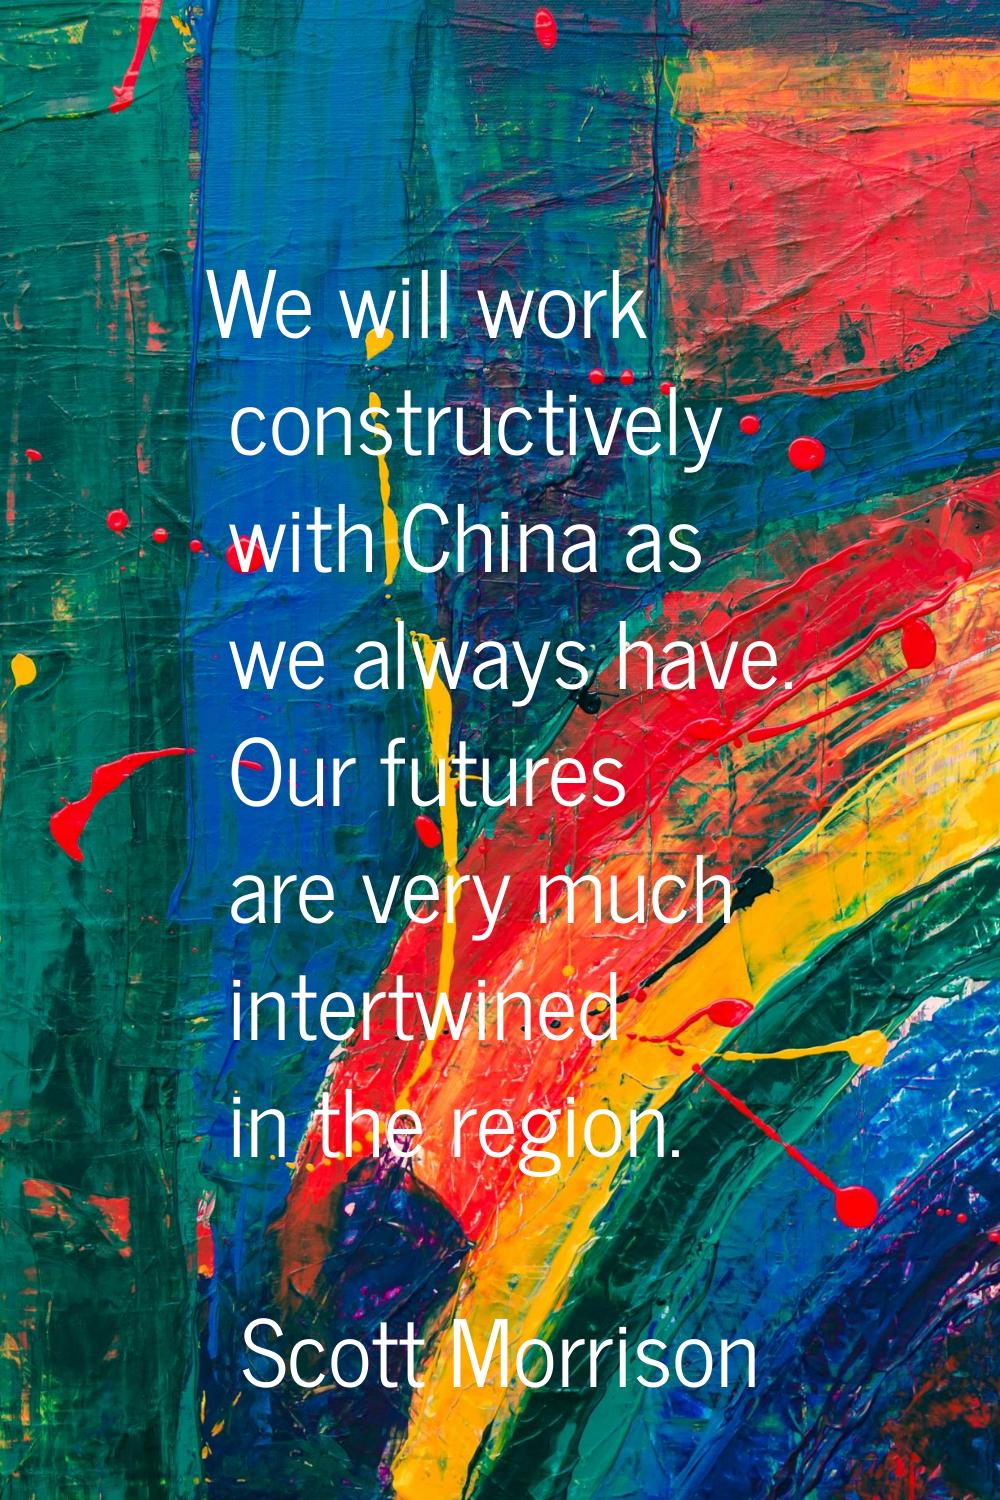 We will work constructively with China as we always have. Our futures are very much intertwined in 